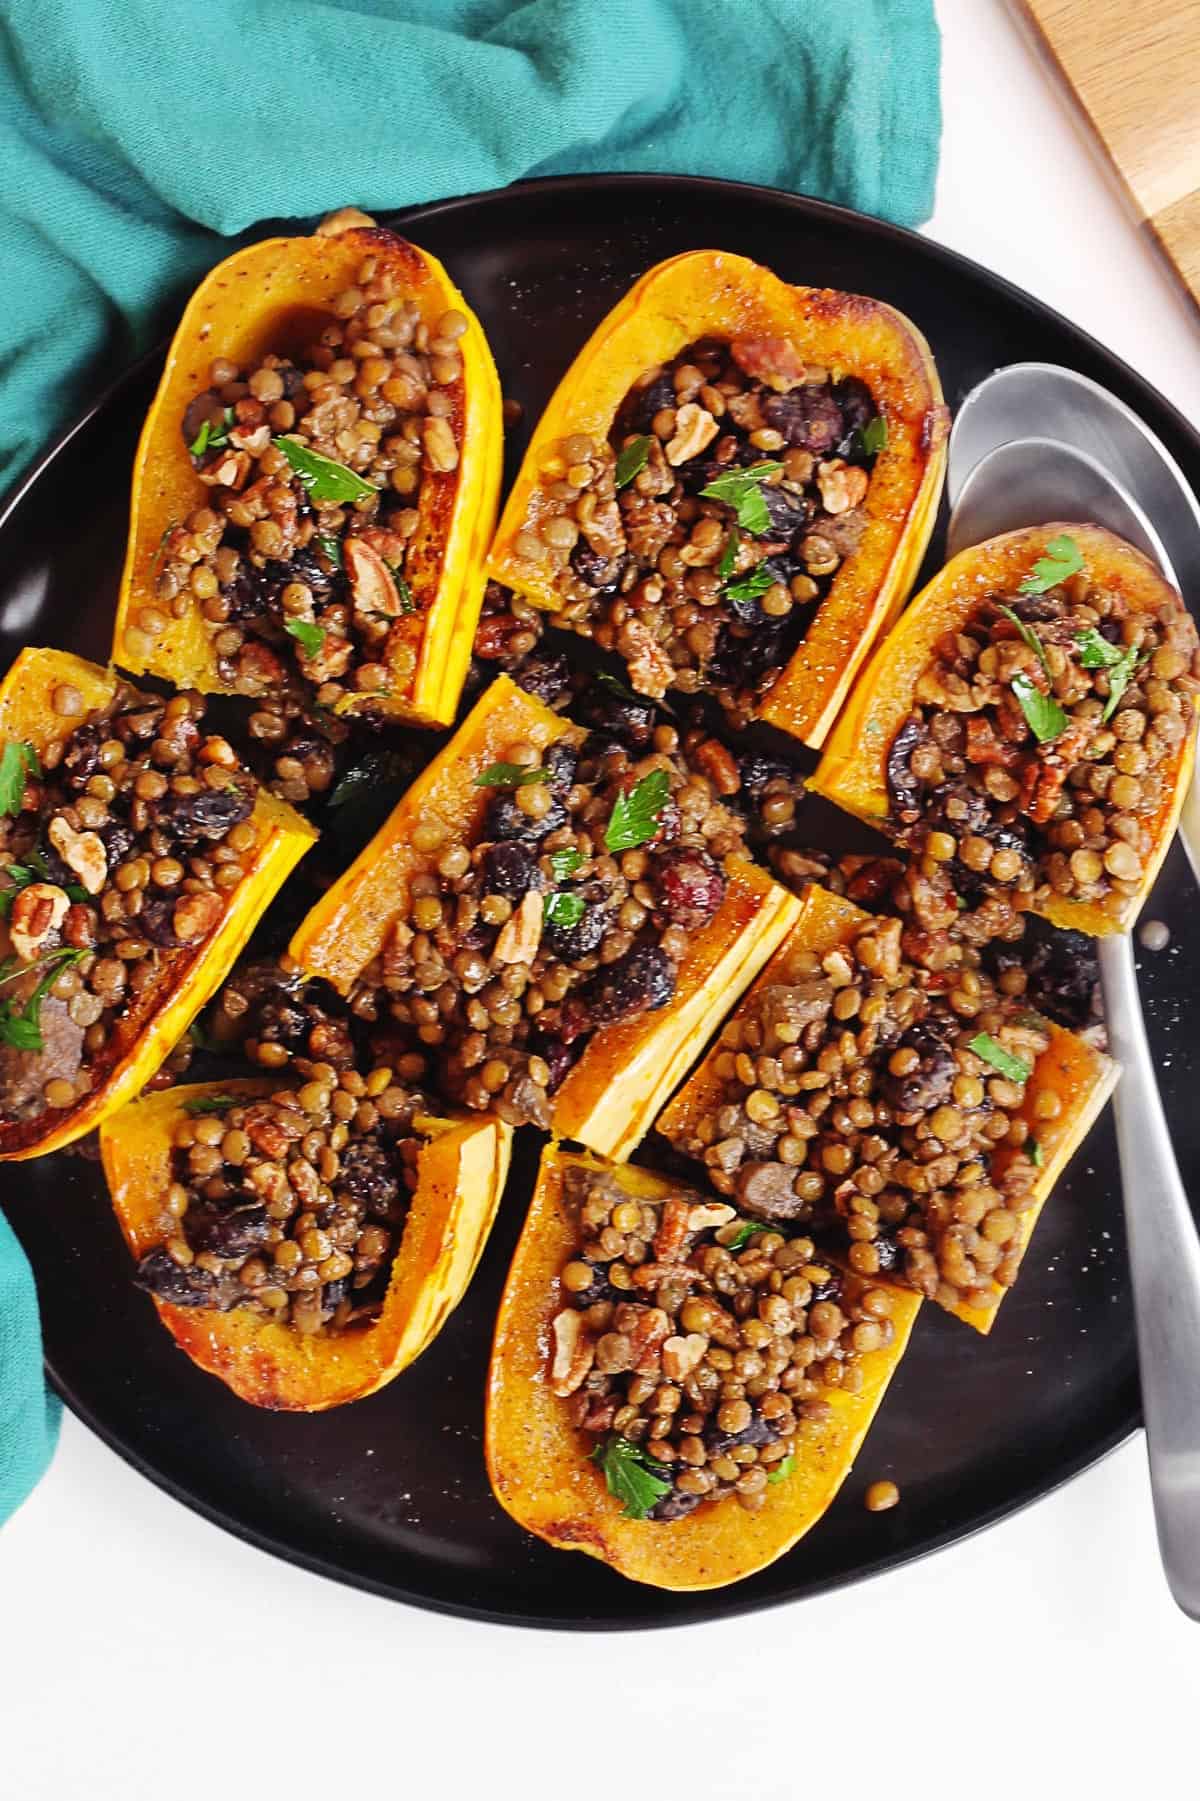 A photo of delicata squash stuffed with a lentil cranberry pecan mixture on a black plate with two spoons.